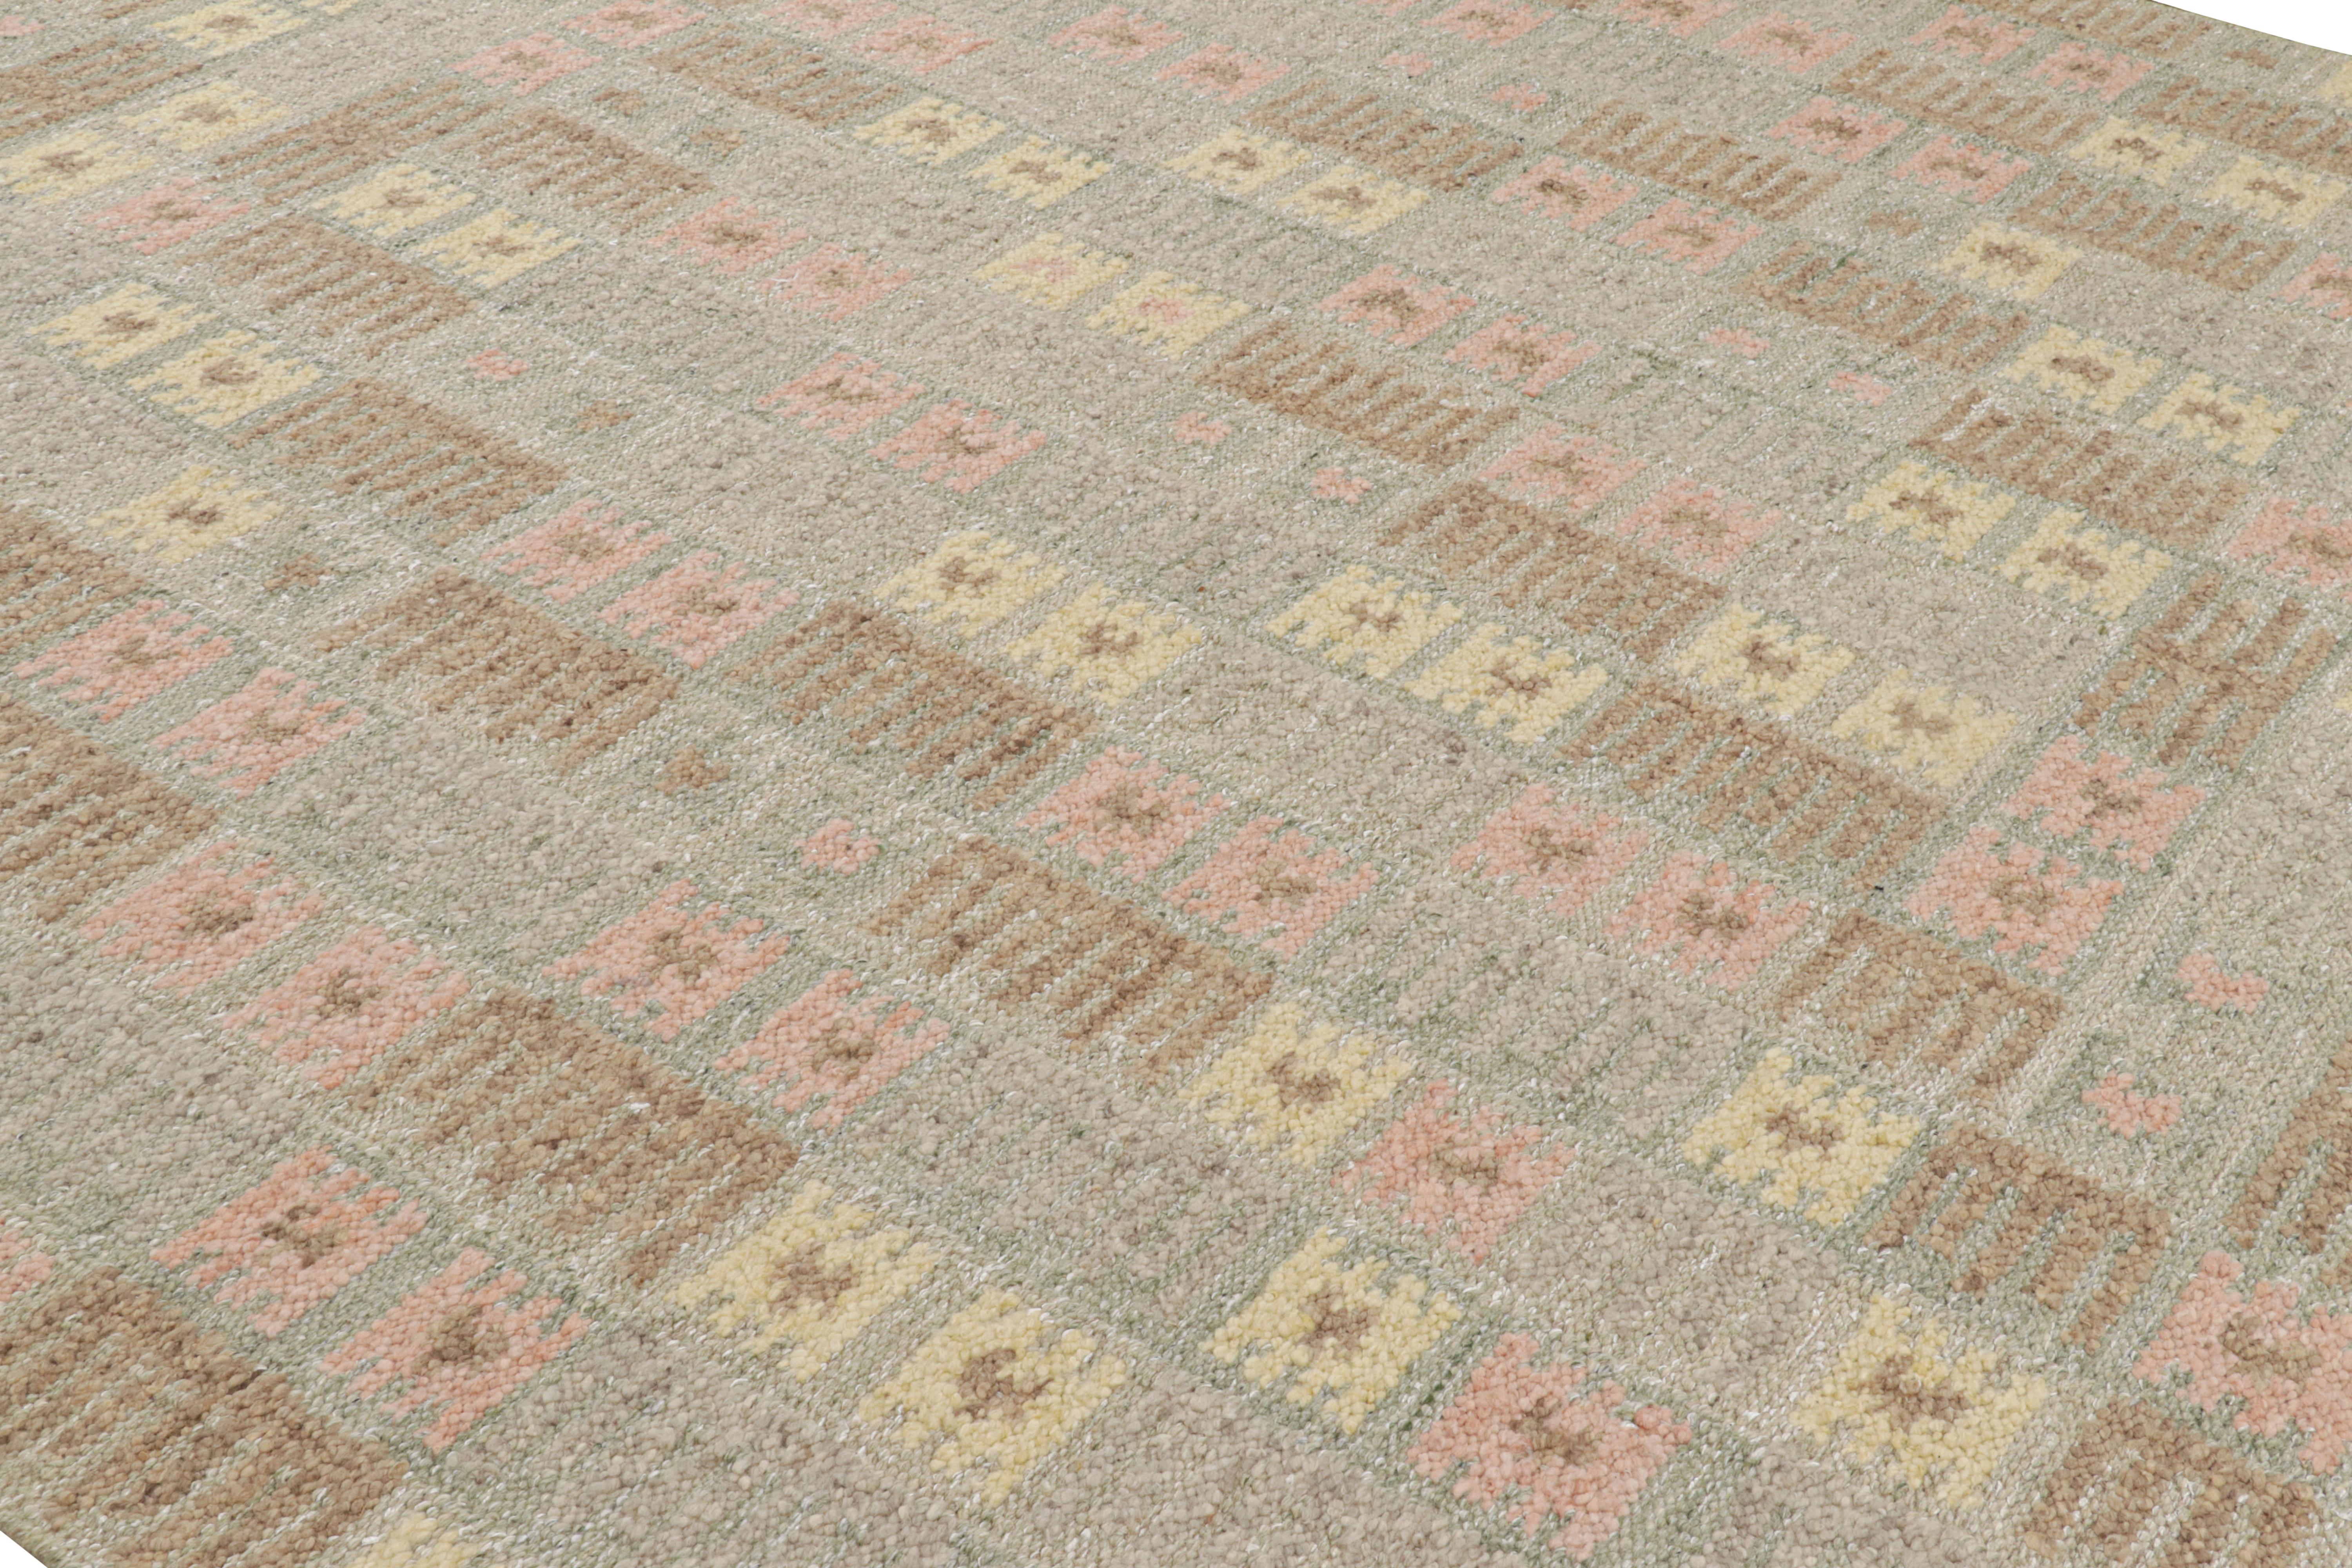 This 9x14 Swedish-style rug, handwoven in a wool flatweave, is from the inventive “Nu” texture in Rug & Kilim’s award-winning Scandinavian flat weave collection. 

On the Design: 

The “Nu” construction enjoys a boucle-like texture of blended yarns,